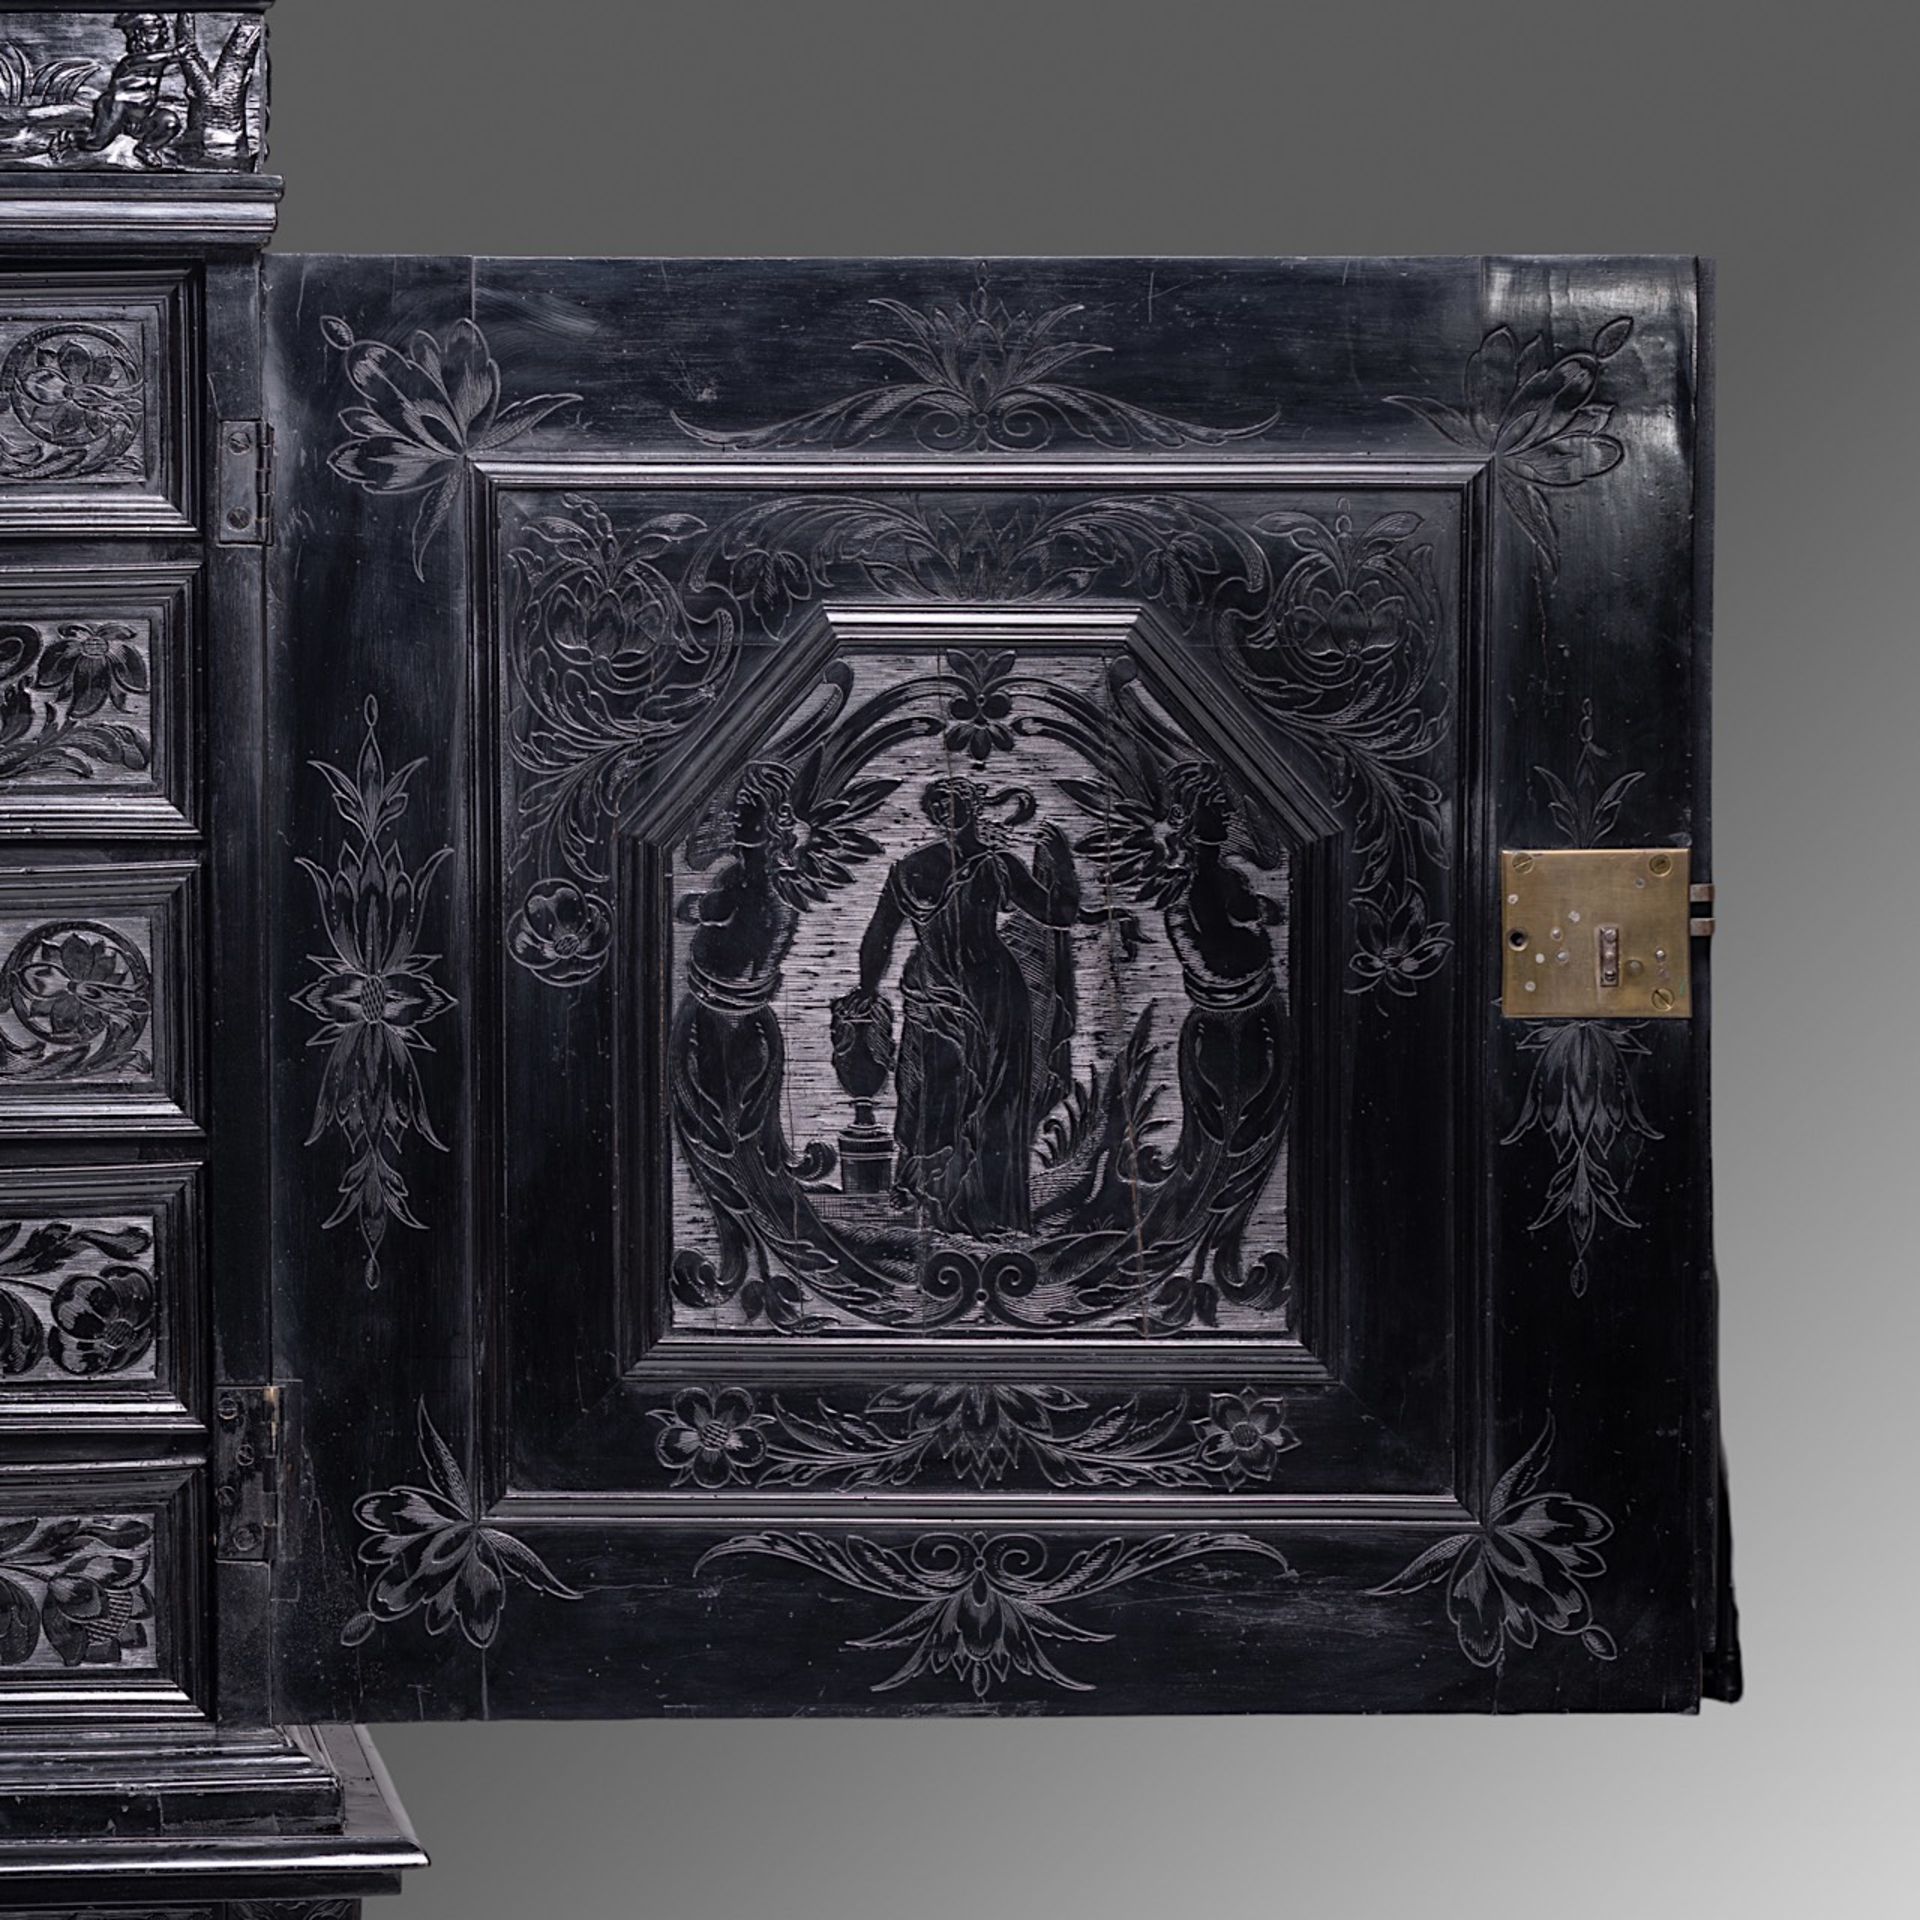 PREMIUM LOT - An exceptional 17thC French ebony and ebonised cabinet-on-stand, H 181,5 - W 163 - D 5 - Bild 10 aus 14